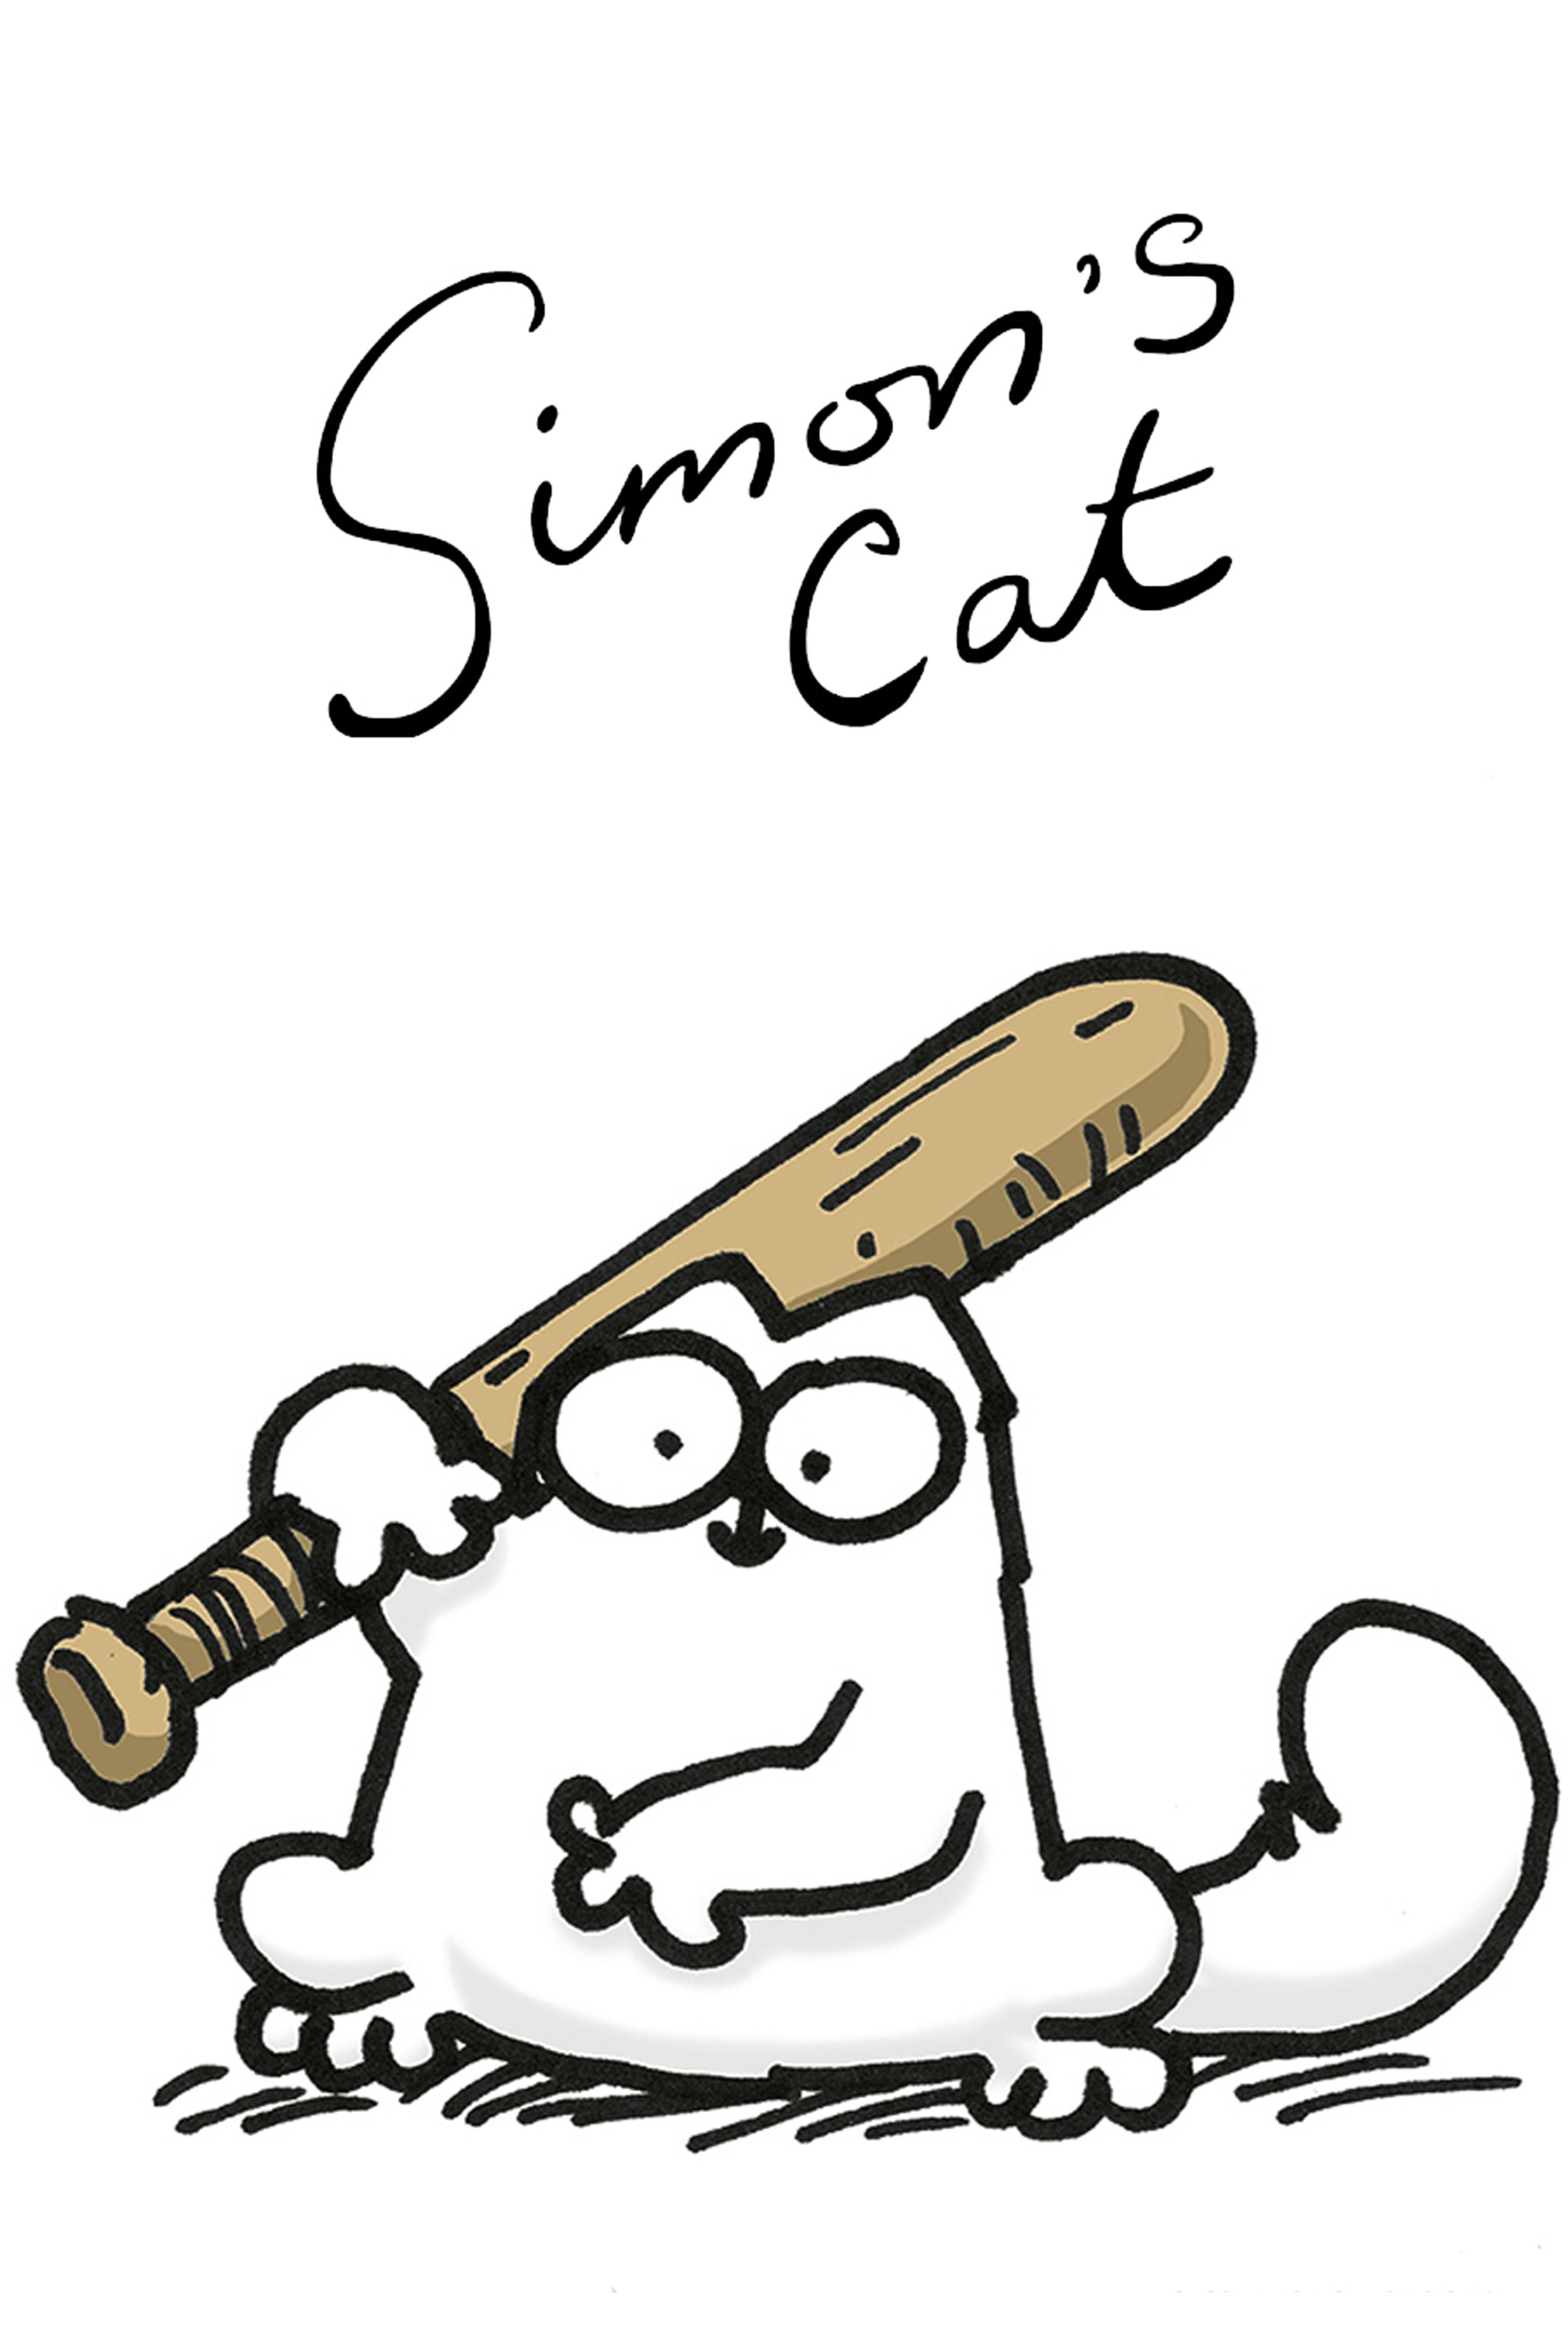 Simon's cat season 3 episodes, Free streaming online, Comedy gold, Relaxing entertainment, 2000x3000 HD Phone